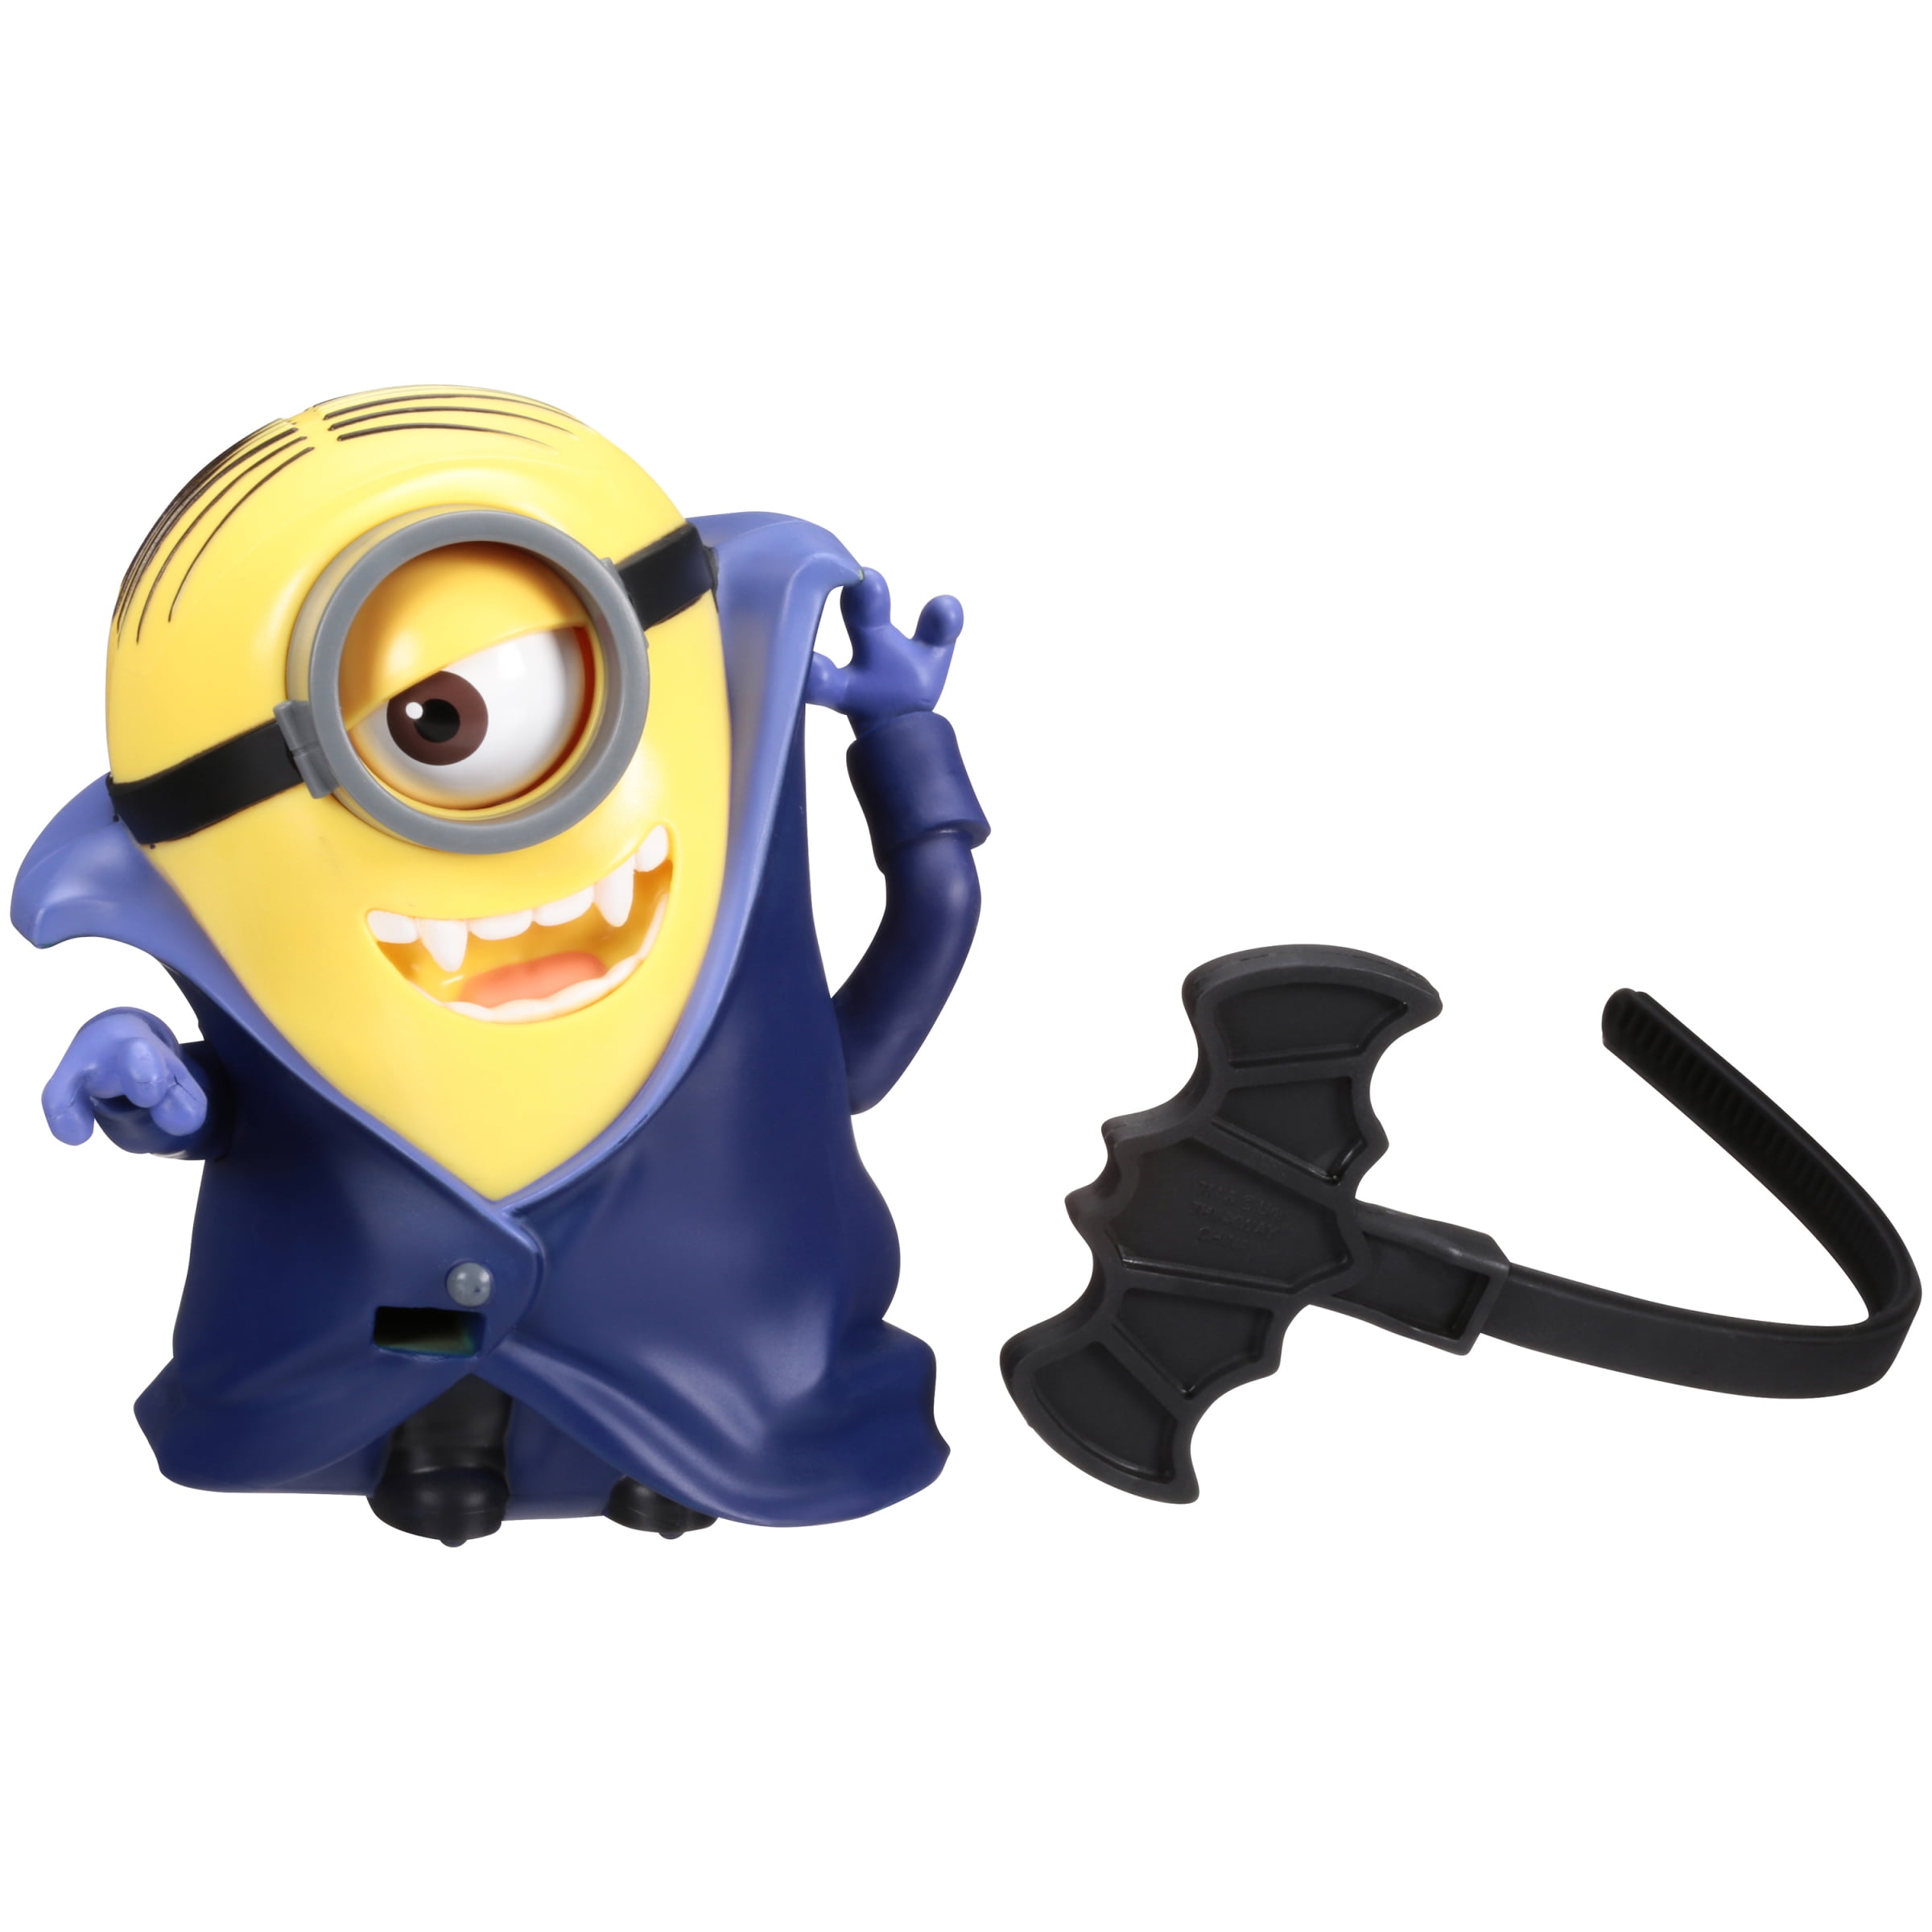 Despicable Me 3 Deluxe Action Figure Banana Crazy Carl for sale online 